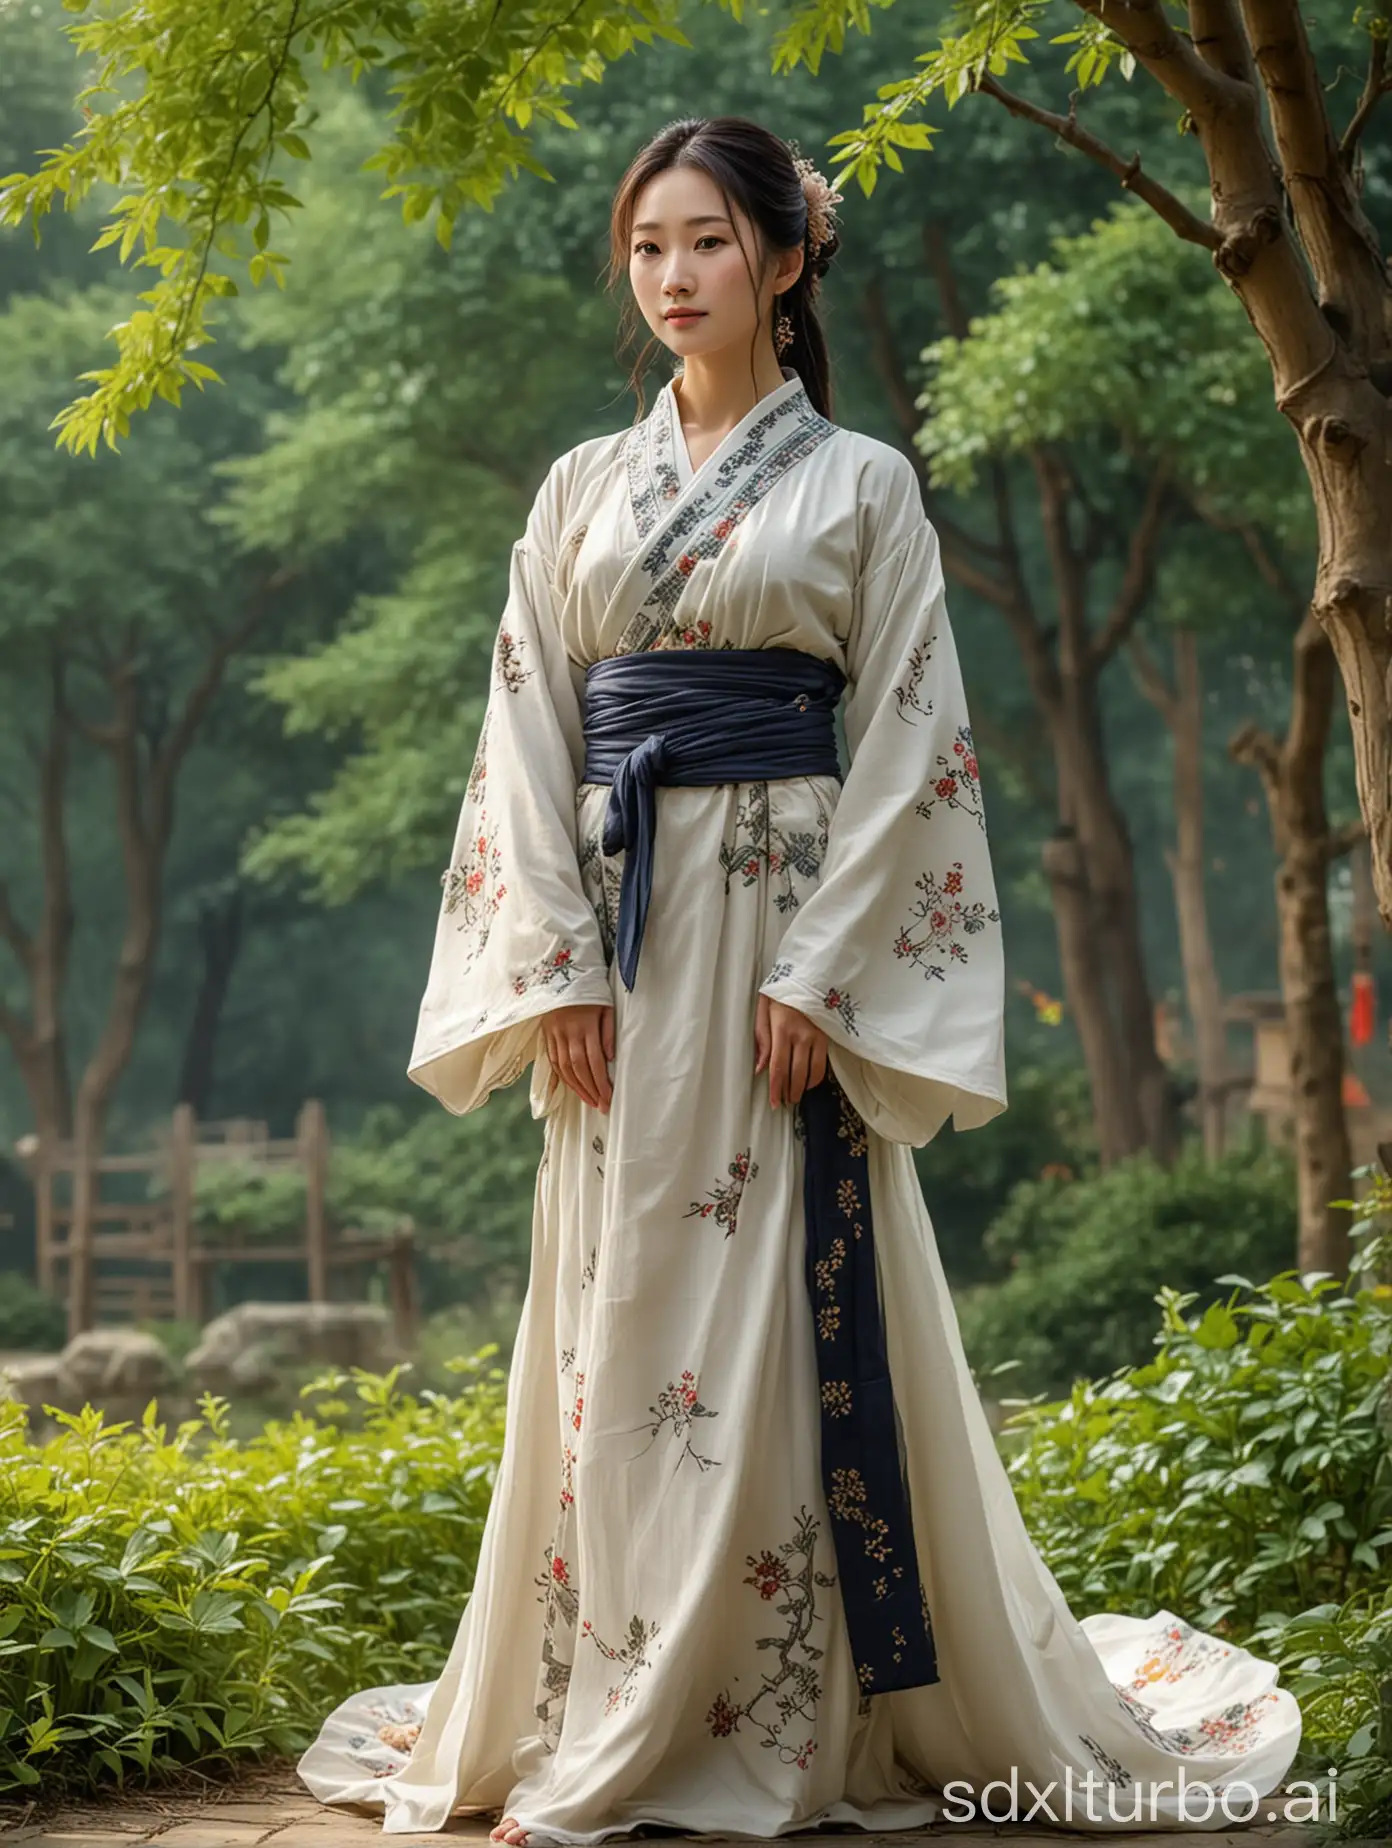 Exquisite-Eastern-Hanstyle-Clothing-Portrait-in-a-Classical-Garden-Setting